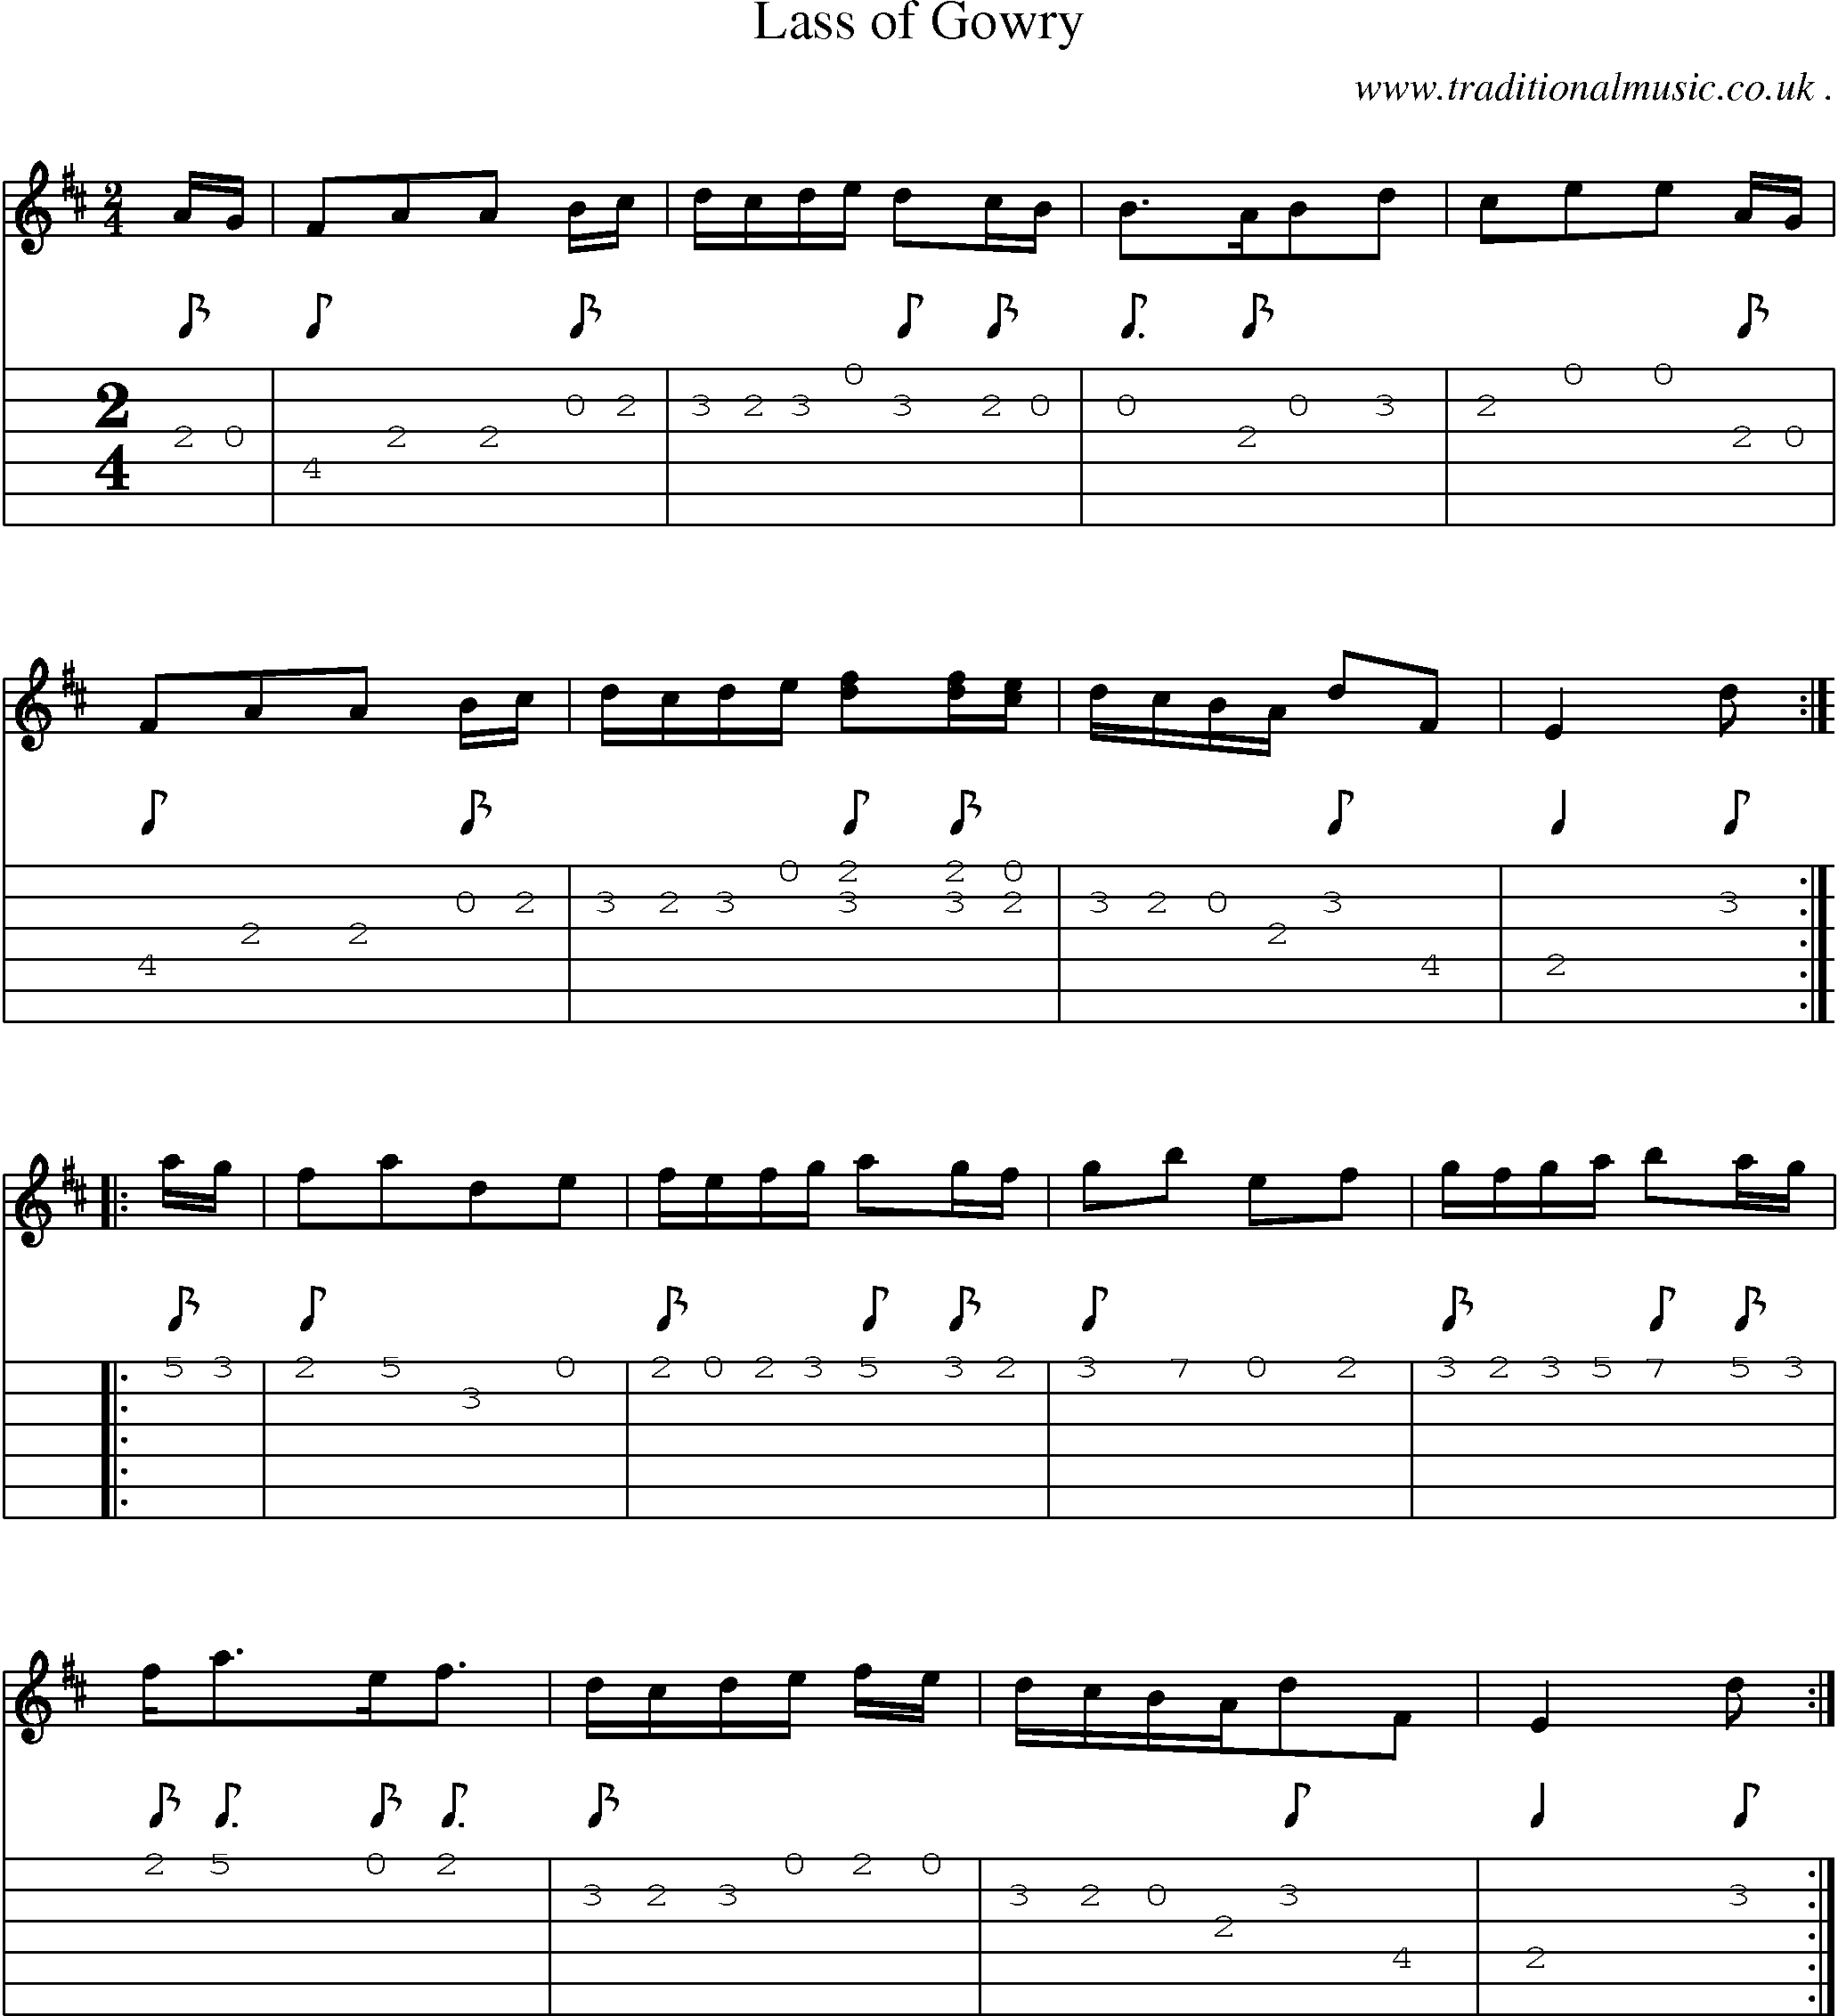 Sheet-Music and Guitar Tabs for Lass Of Gowry